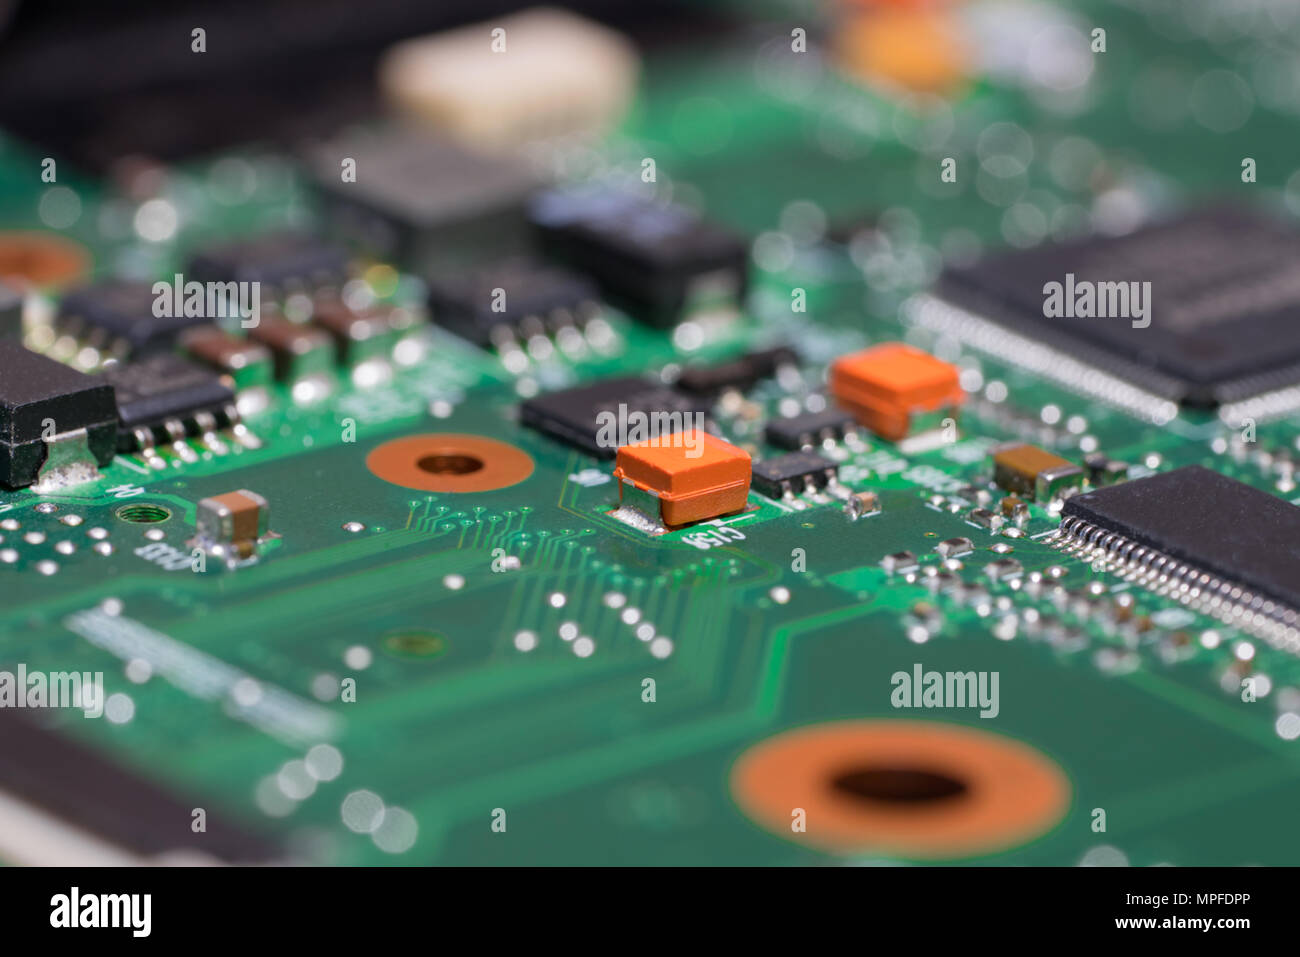 Laptop motherboard closeup. Printed circuit Board with SMD capacitors, resistors, diodes and chips. Stock Photo